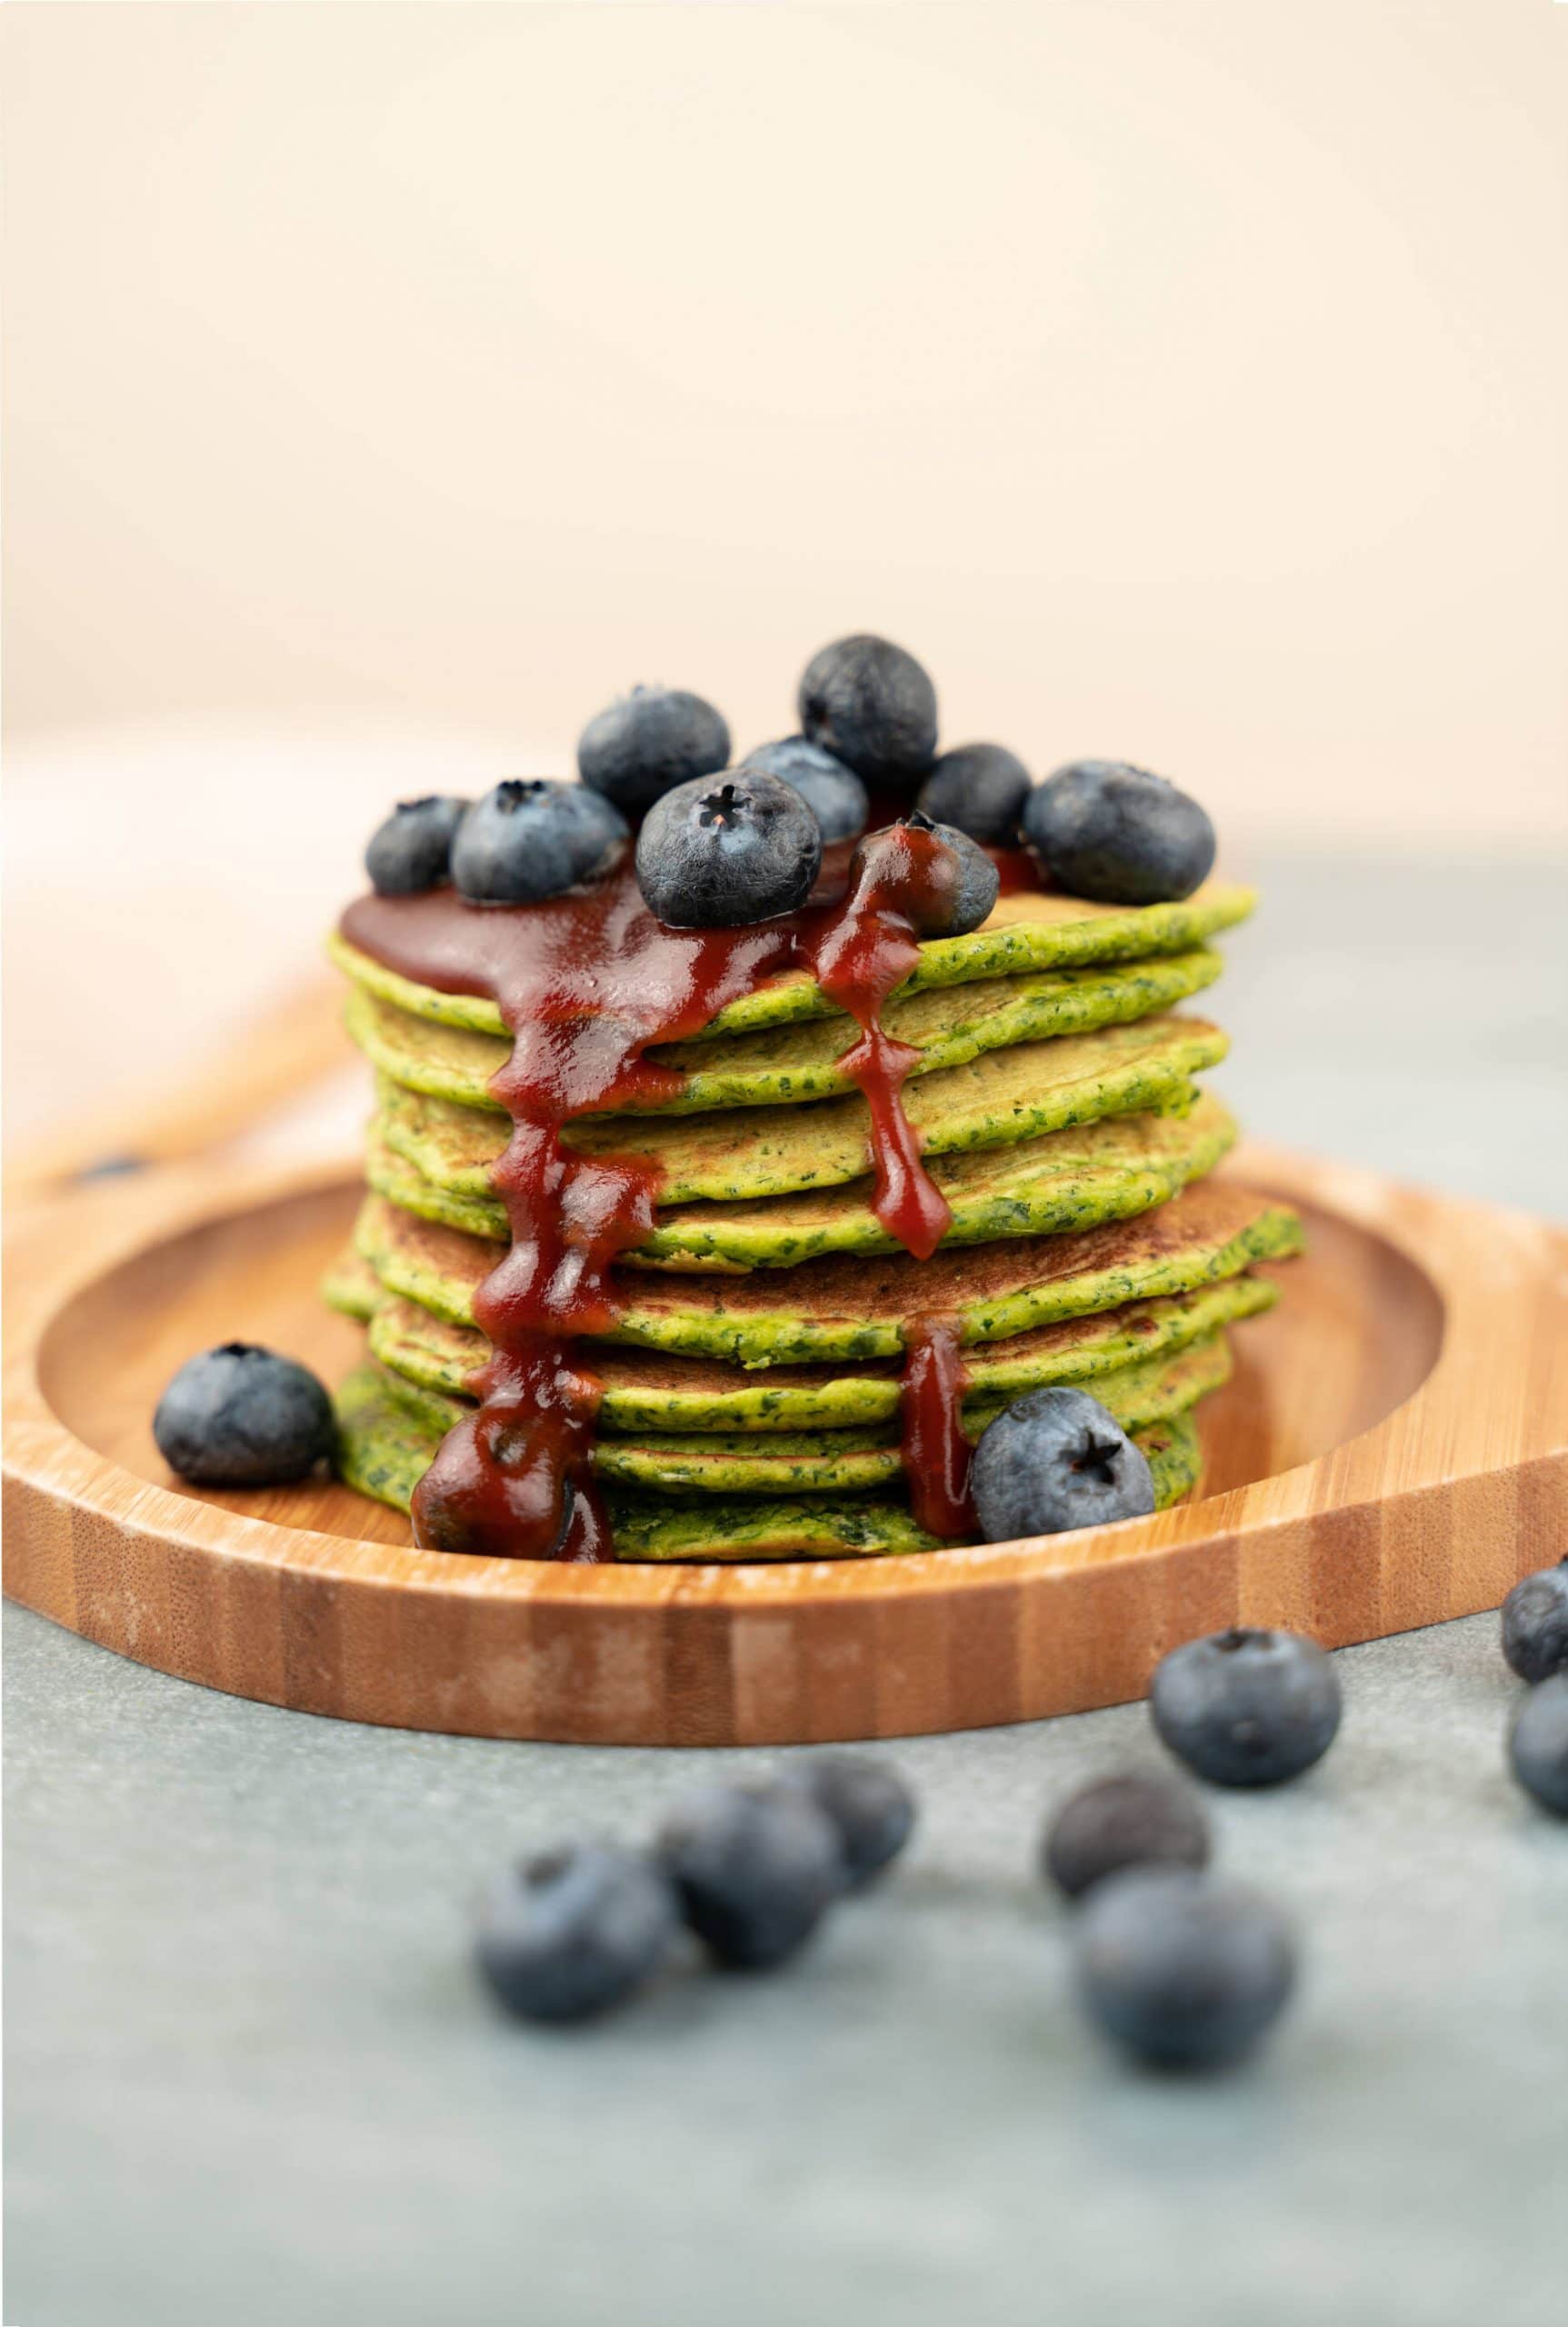 Simple Finnish Spinach Pancakes